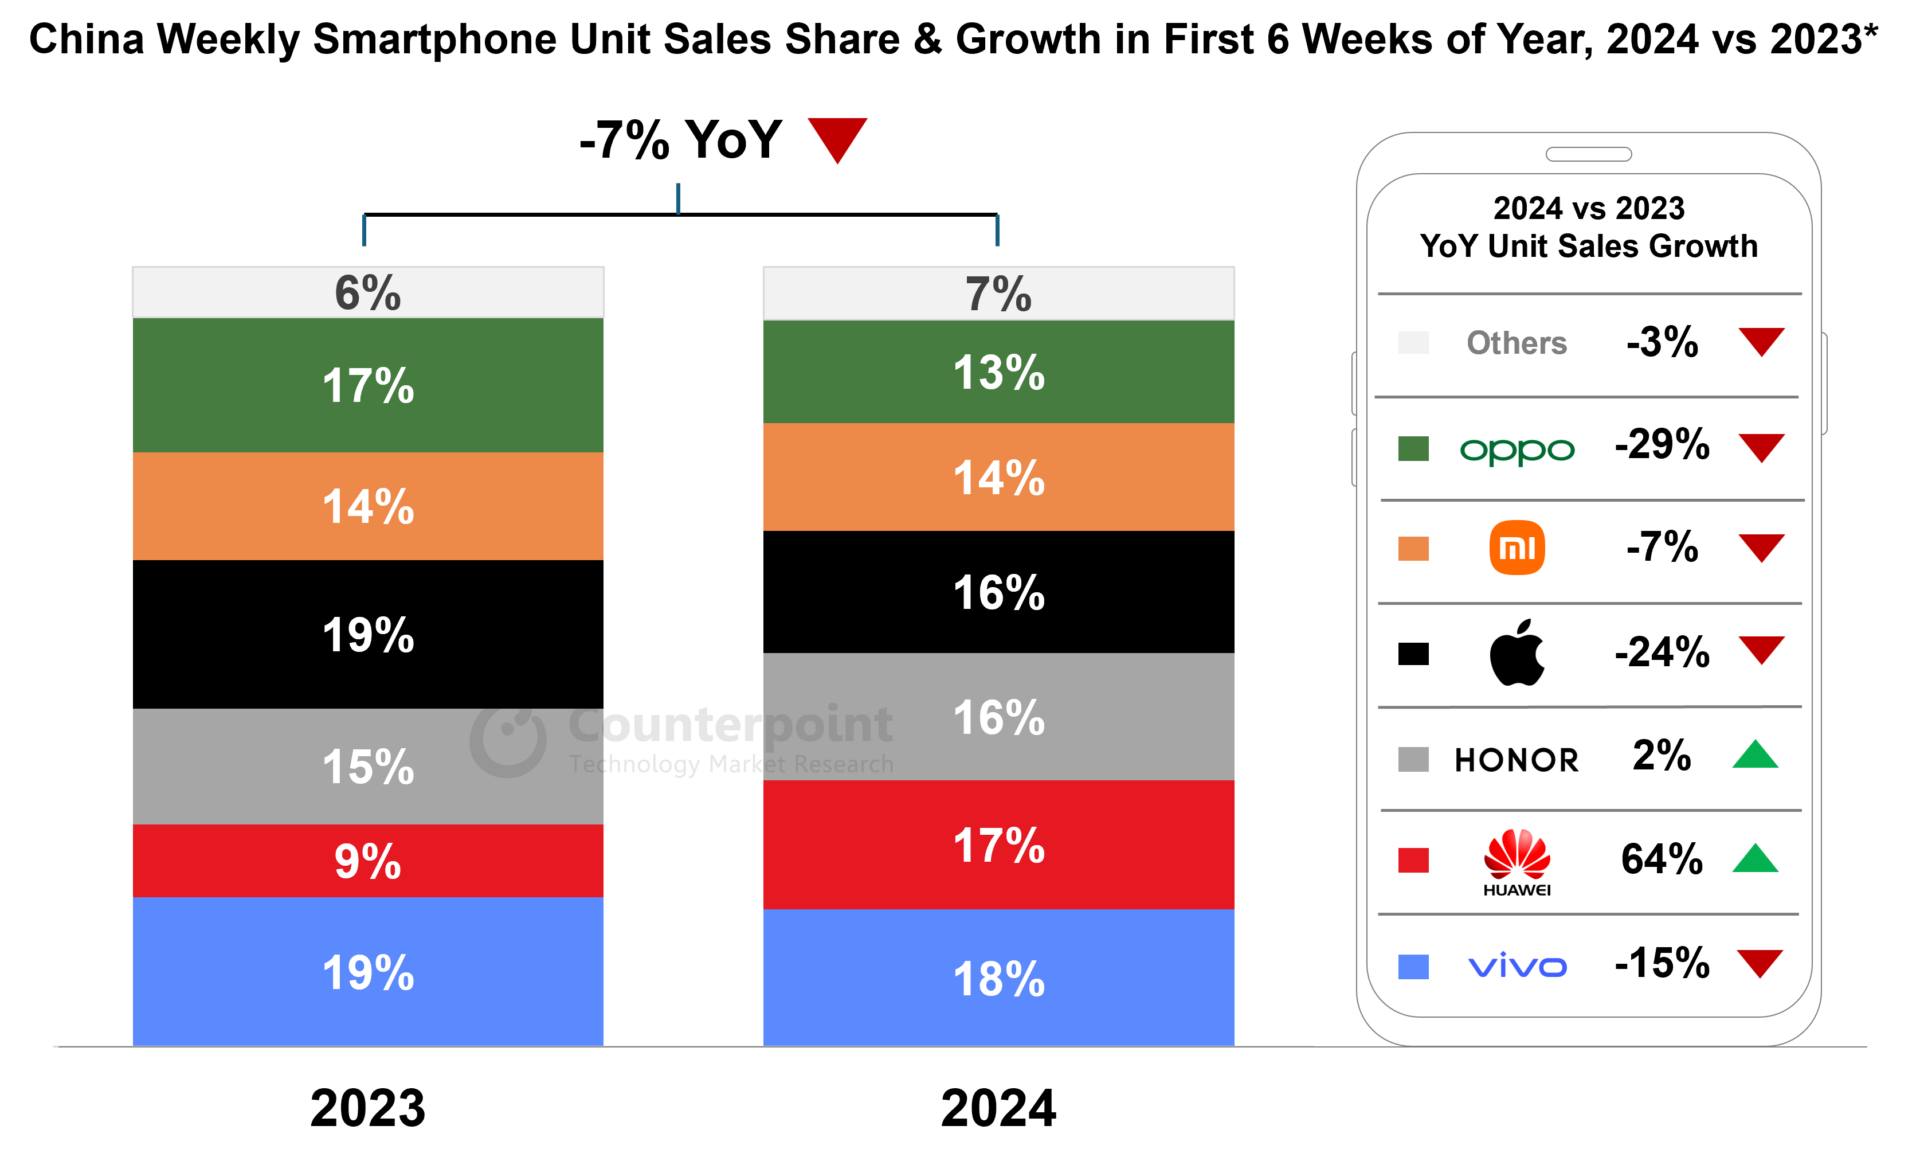 iPhone sales experience a 24% drop in China early 2024.